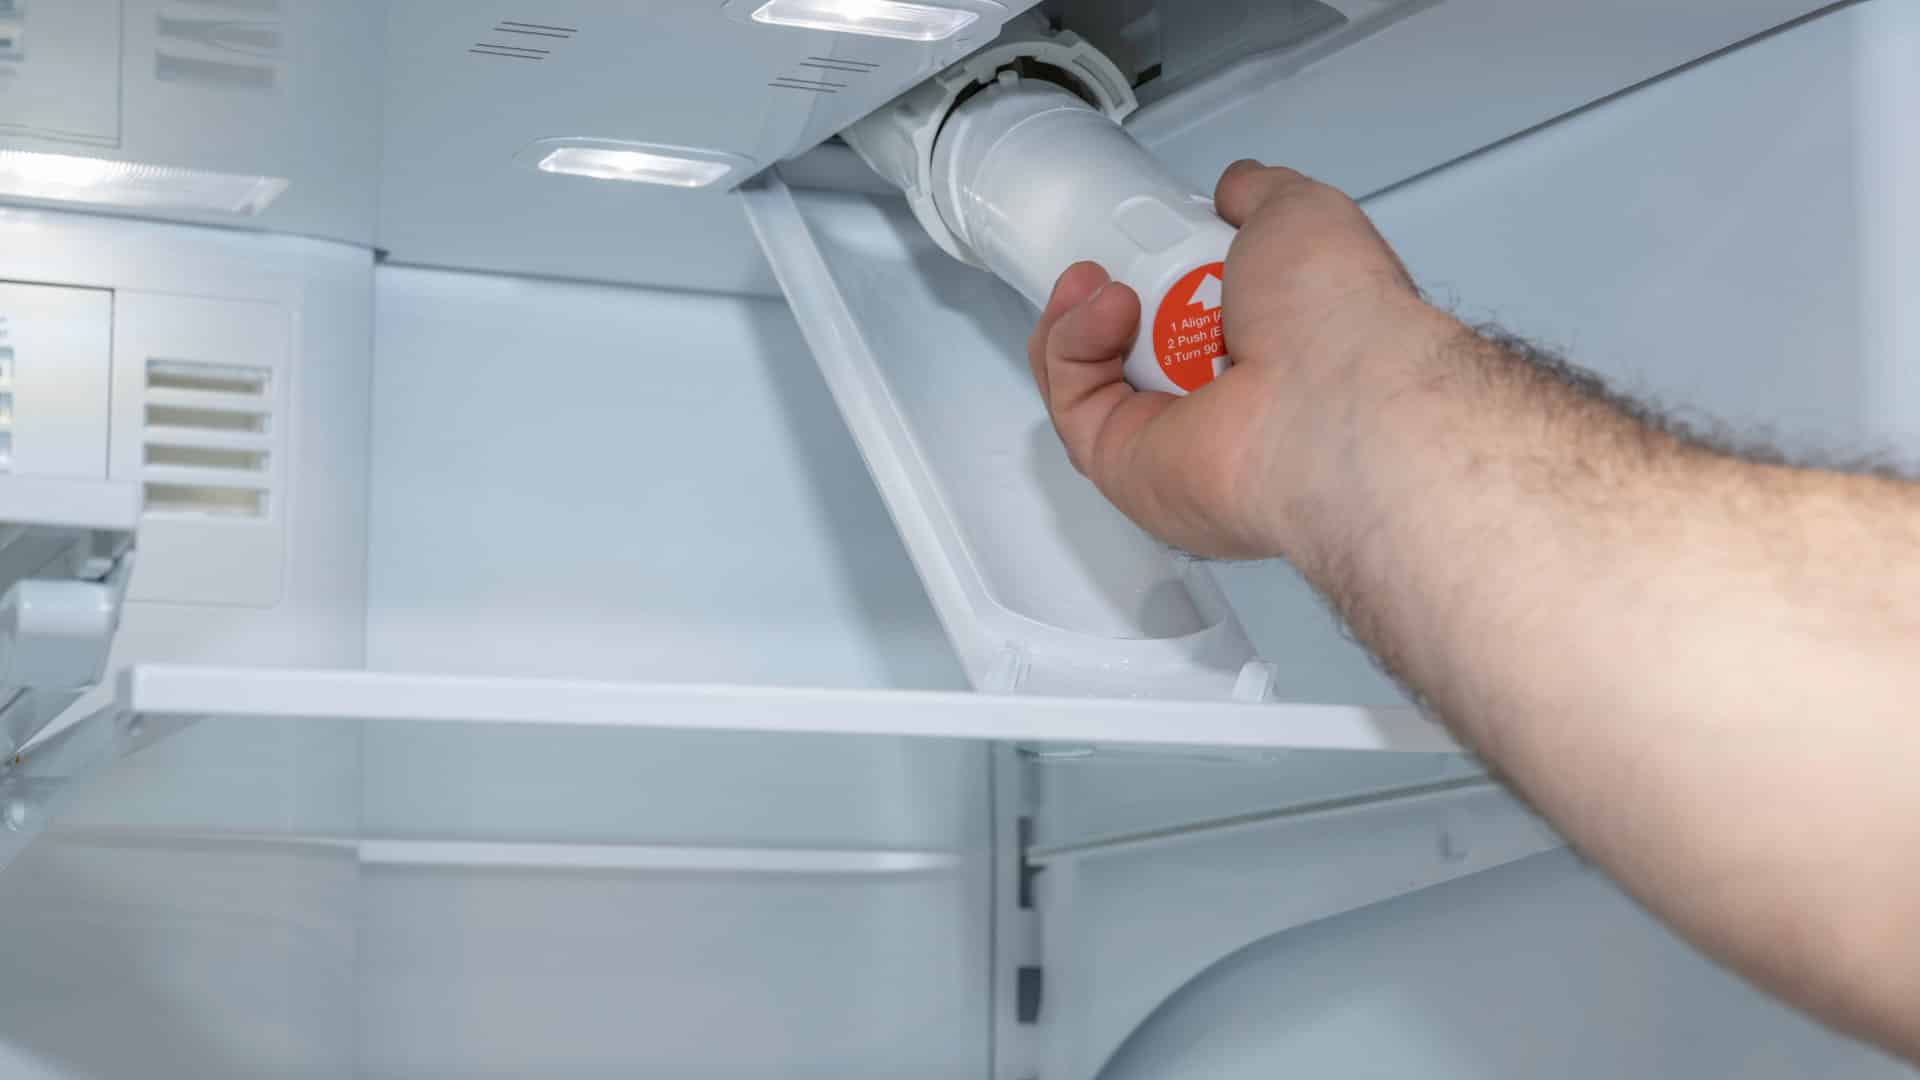 How To Change Water Filter On Samsung Refrigerator